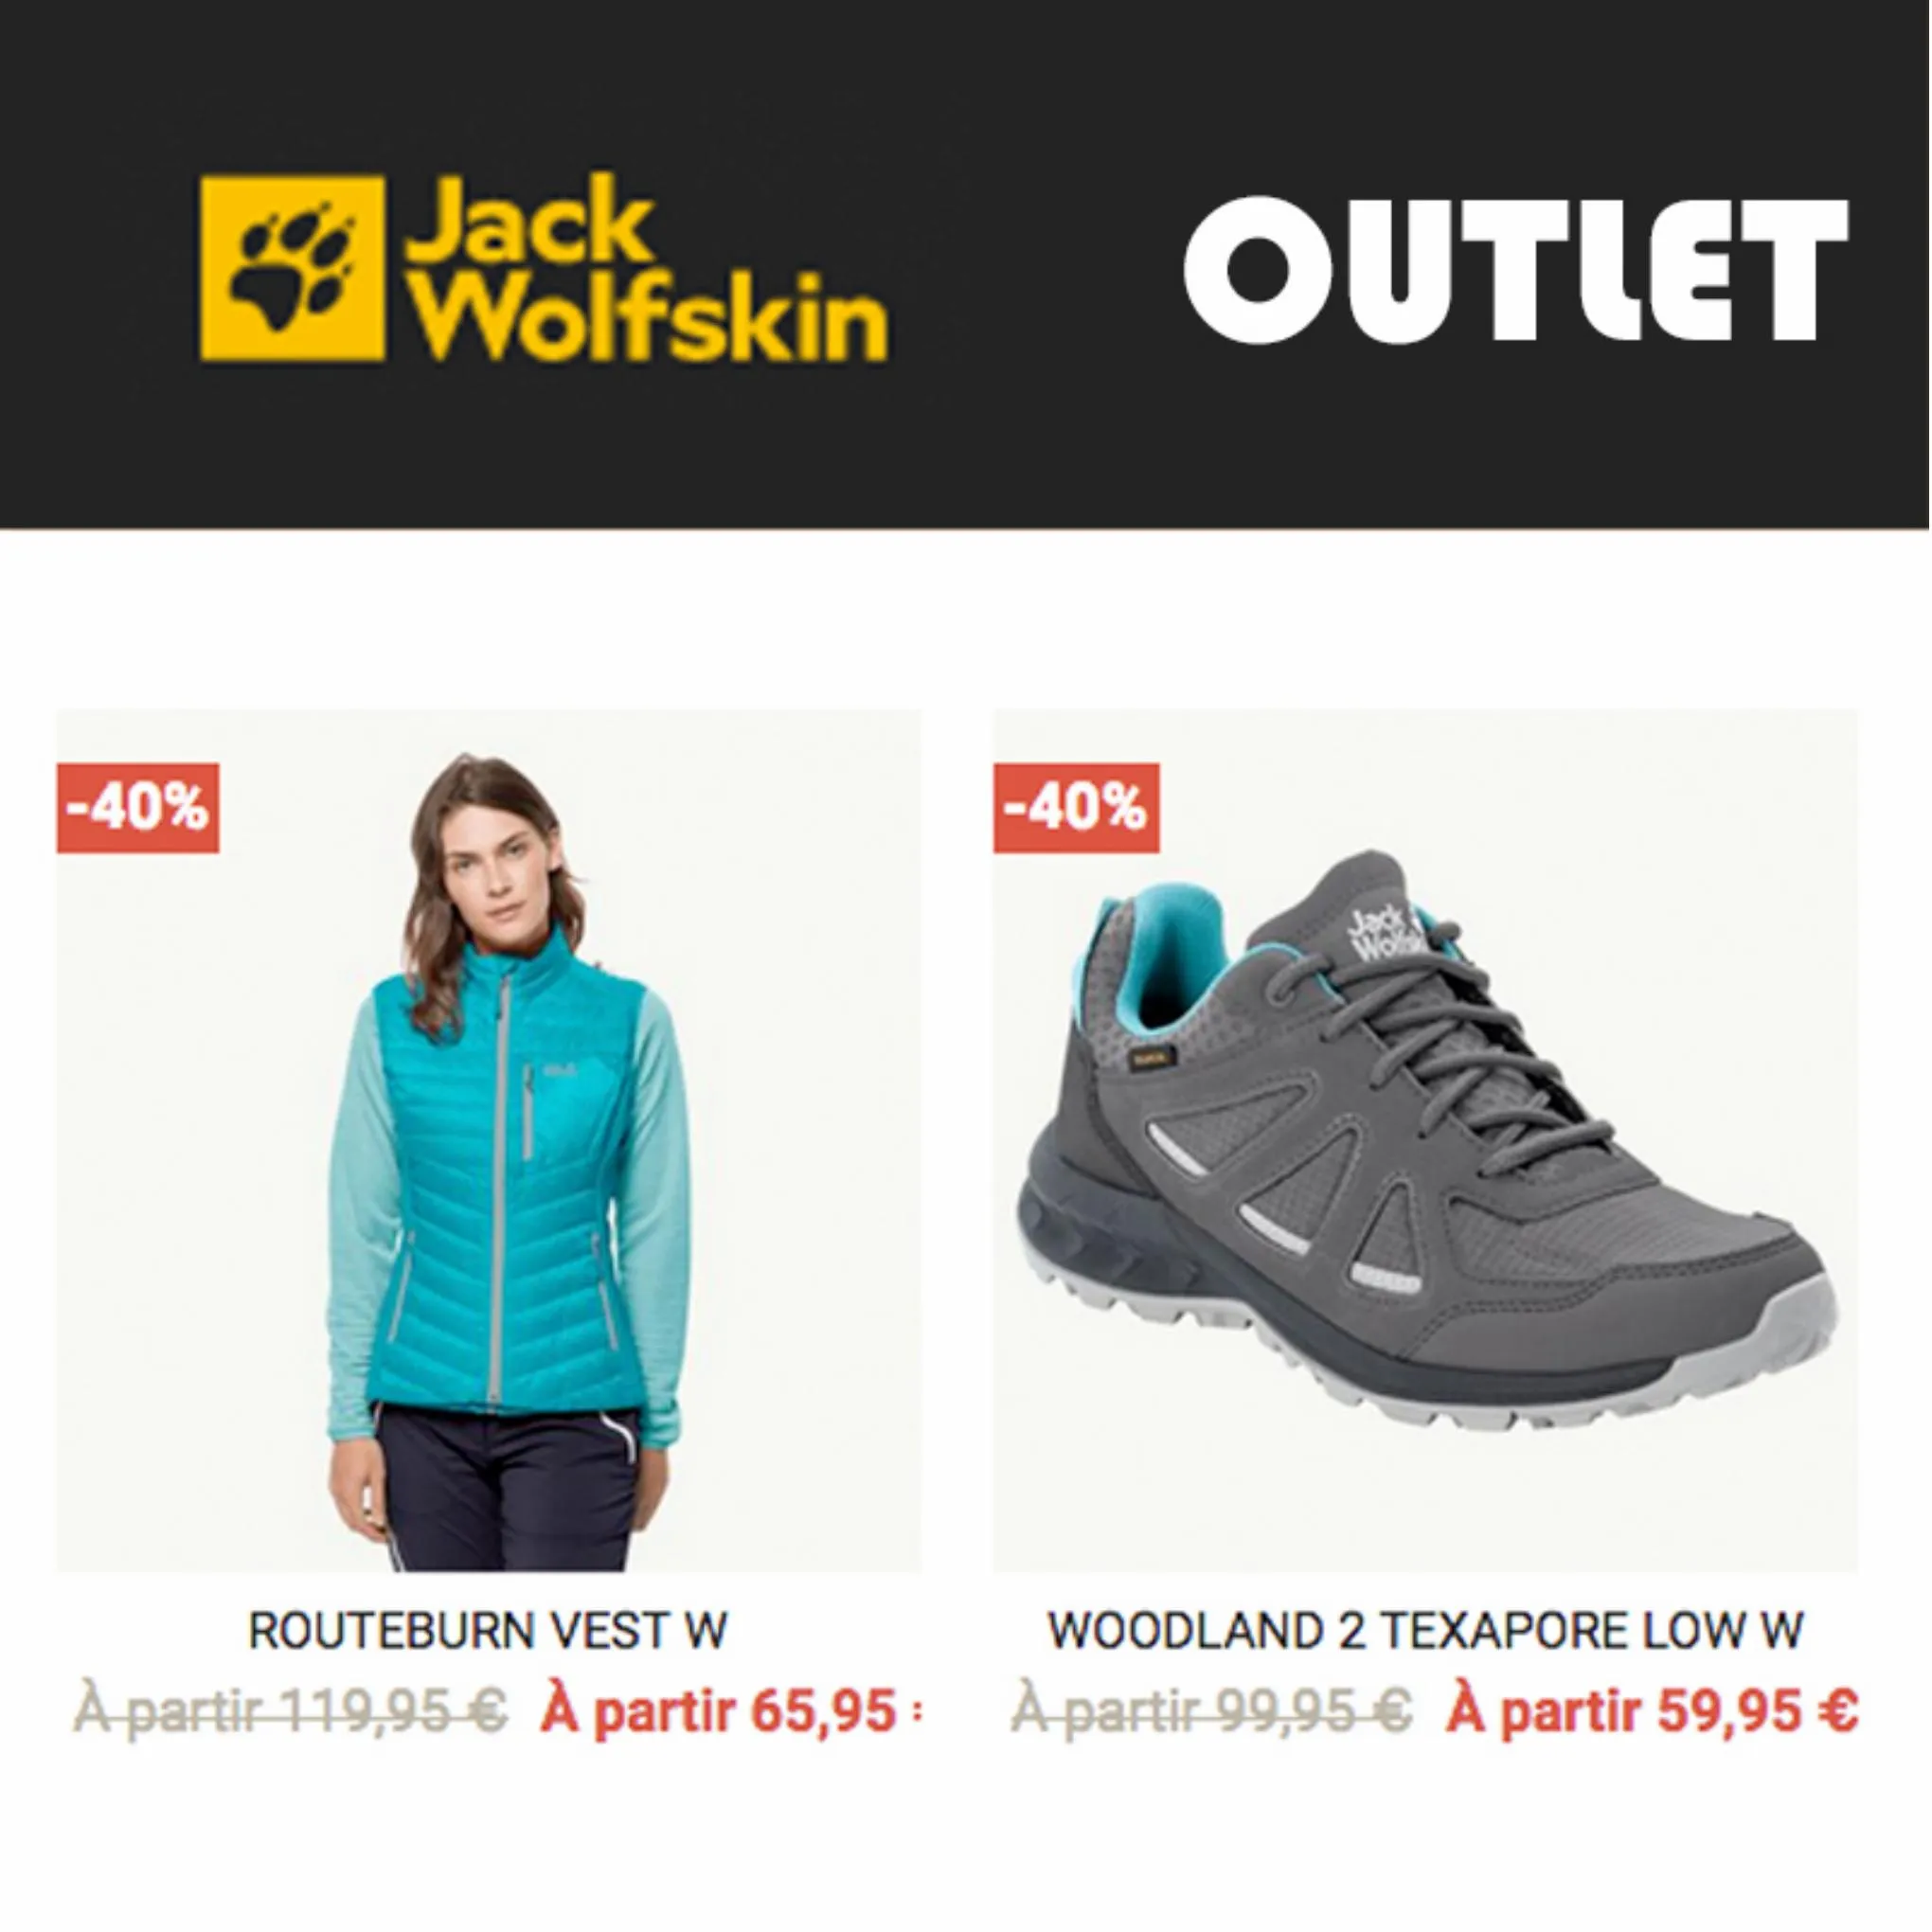 Catalogue Outlet Jack Wolfskin, page 00005